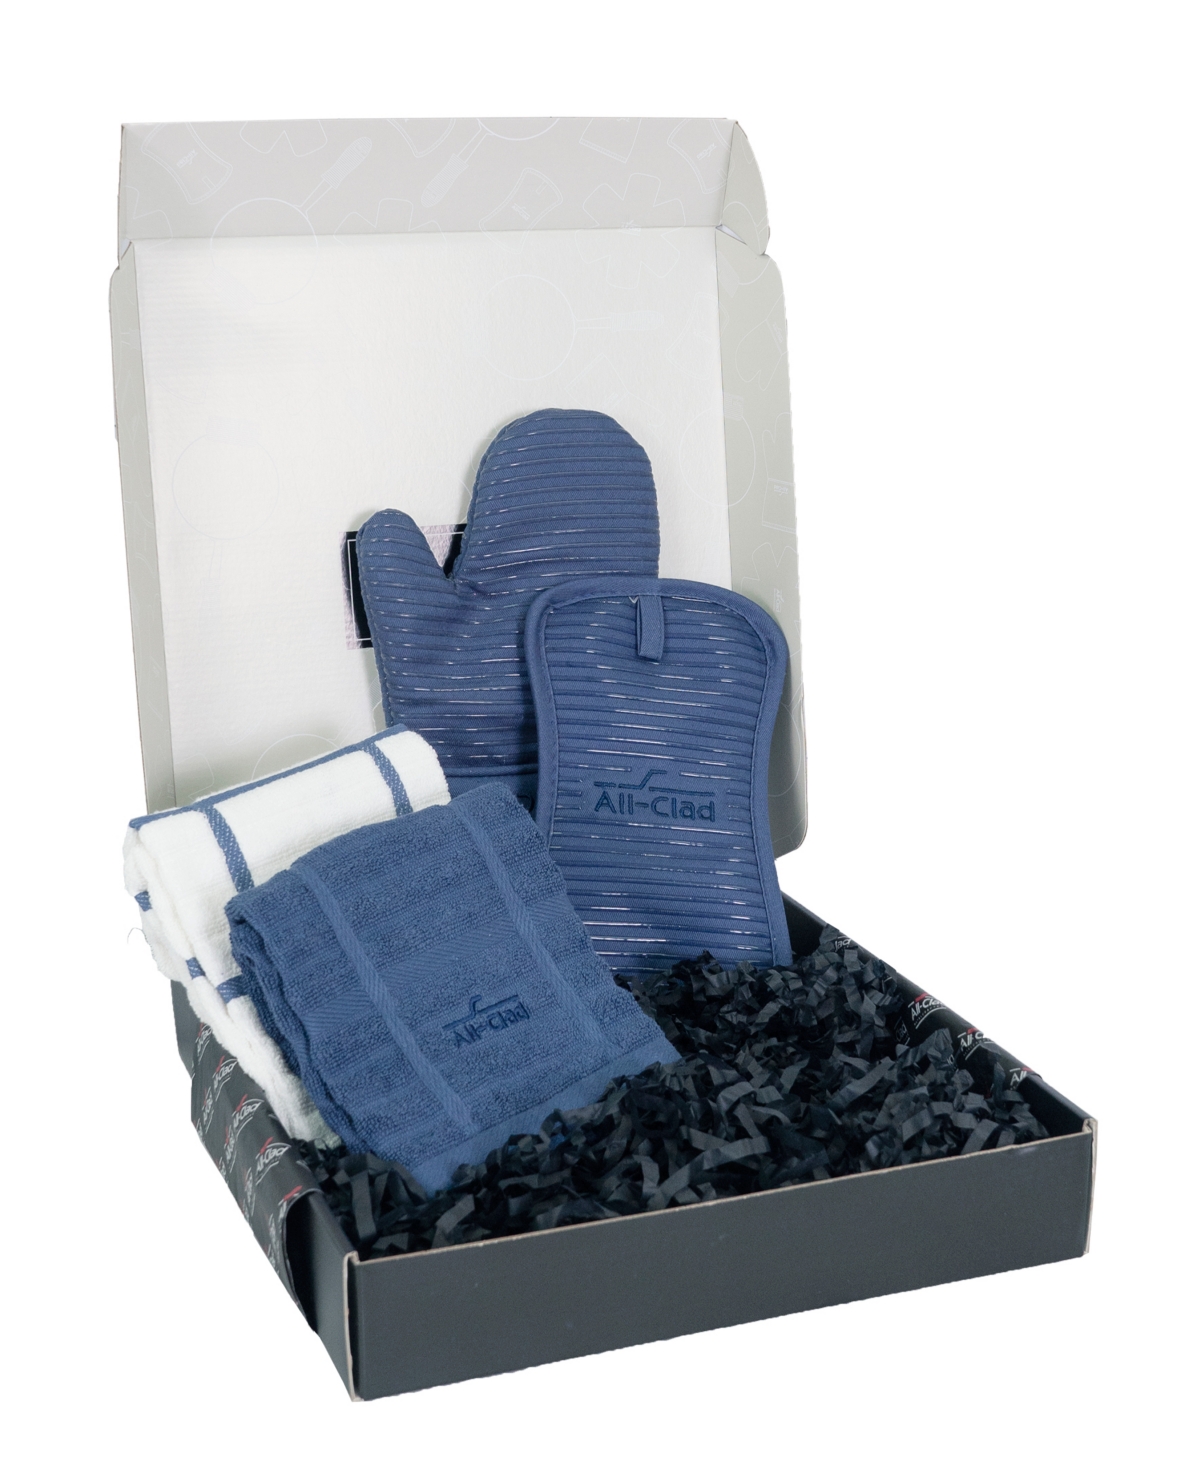 All-clad Foundation Collection 4-piece Gift Set In Indigo